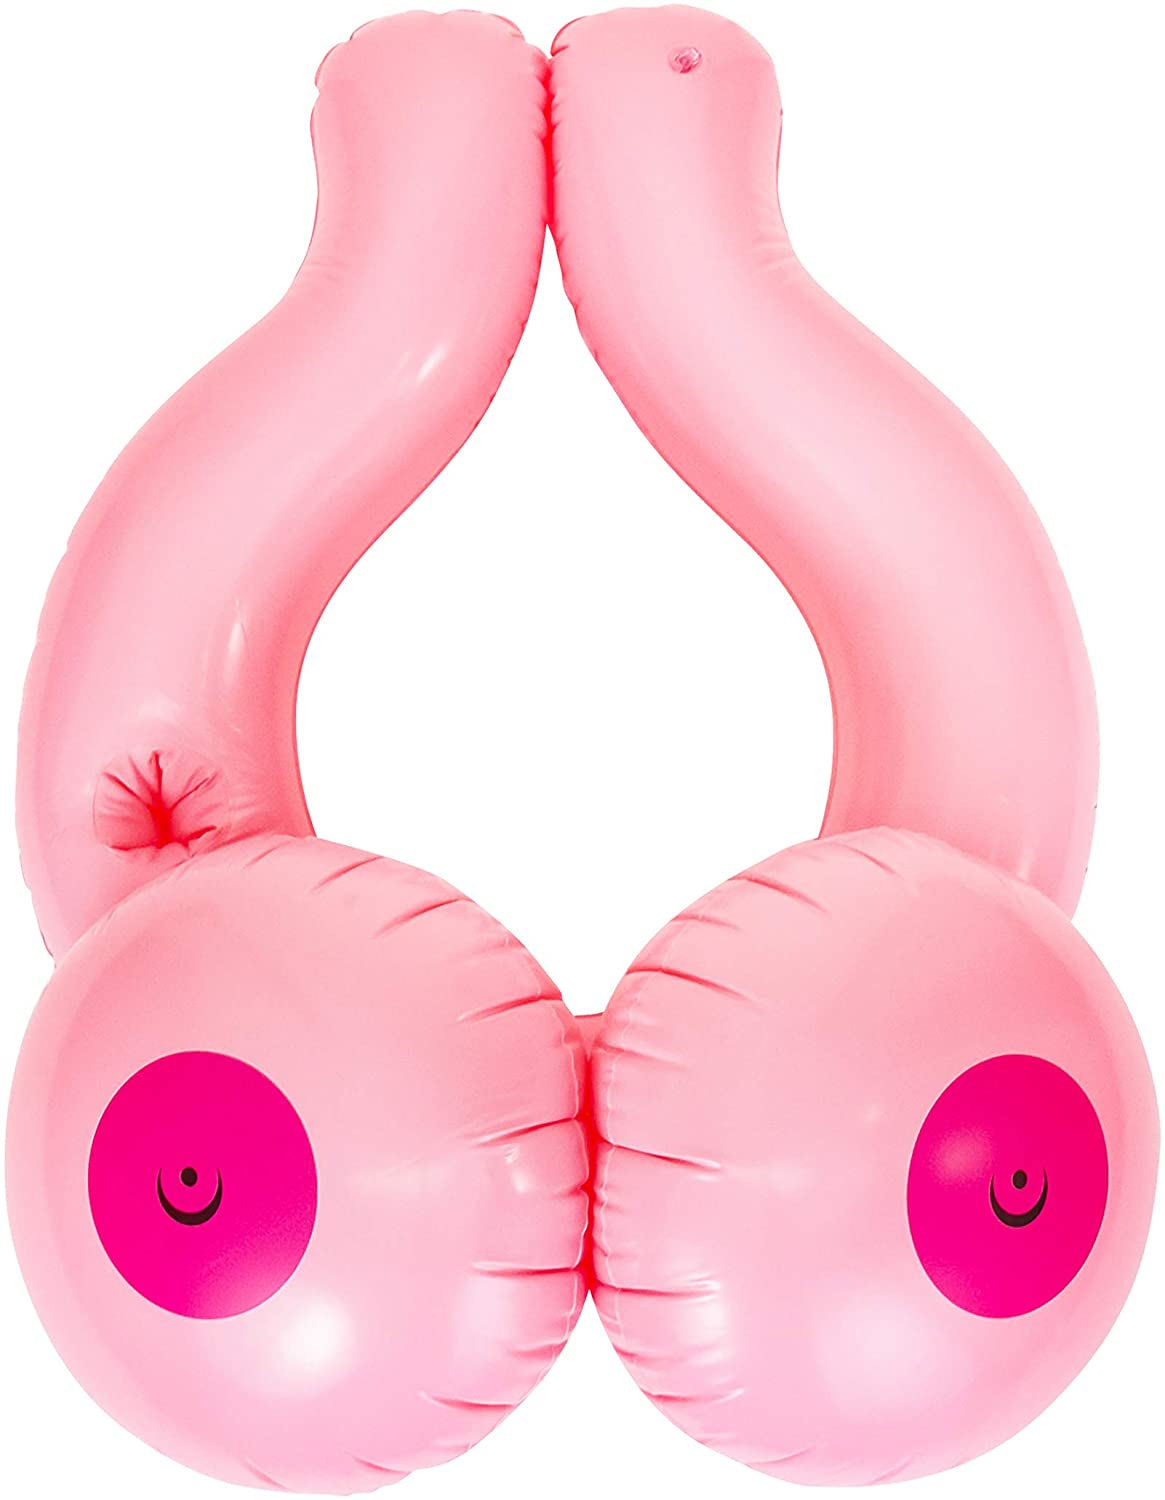 Boob Floatie for Bachelorette Pool Party with Drink Cup Holder Beach Fun Boobie Inflatable Floats for Teens and Adults